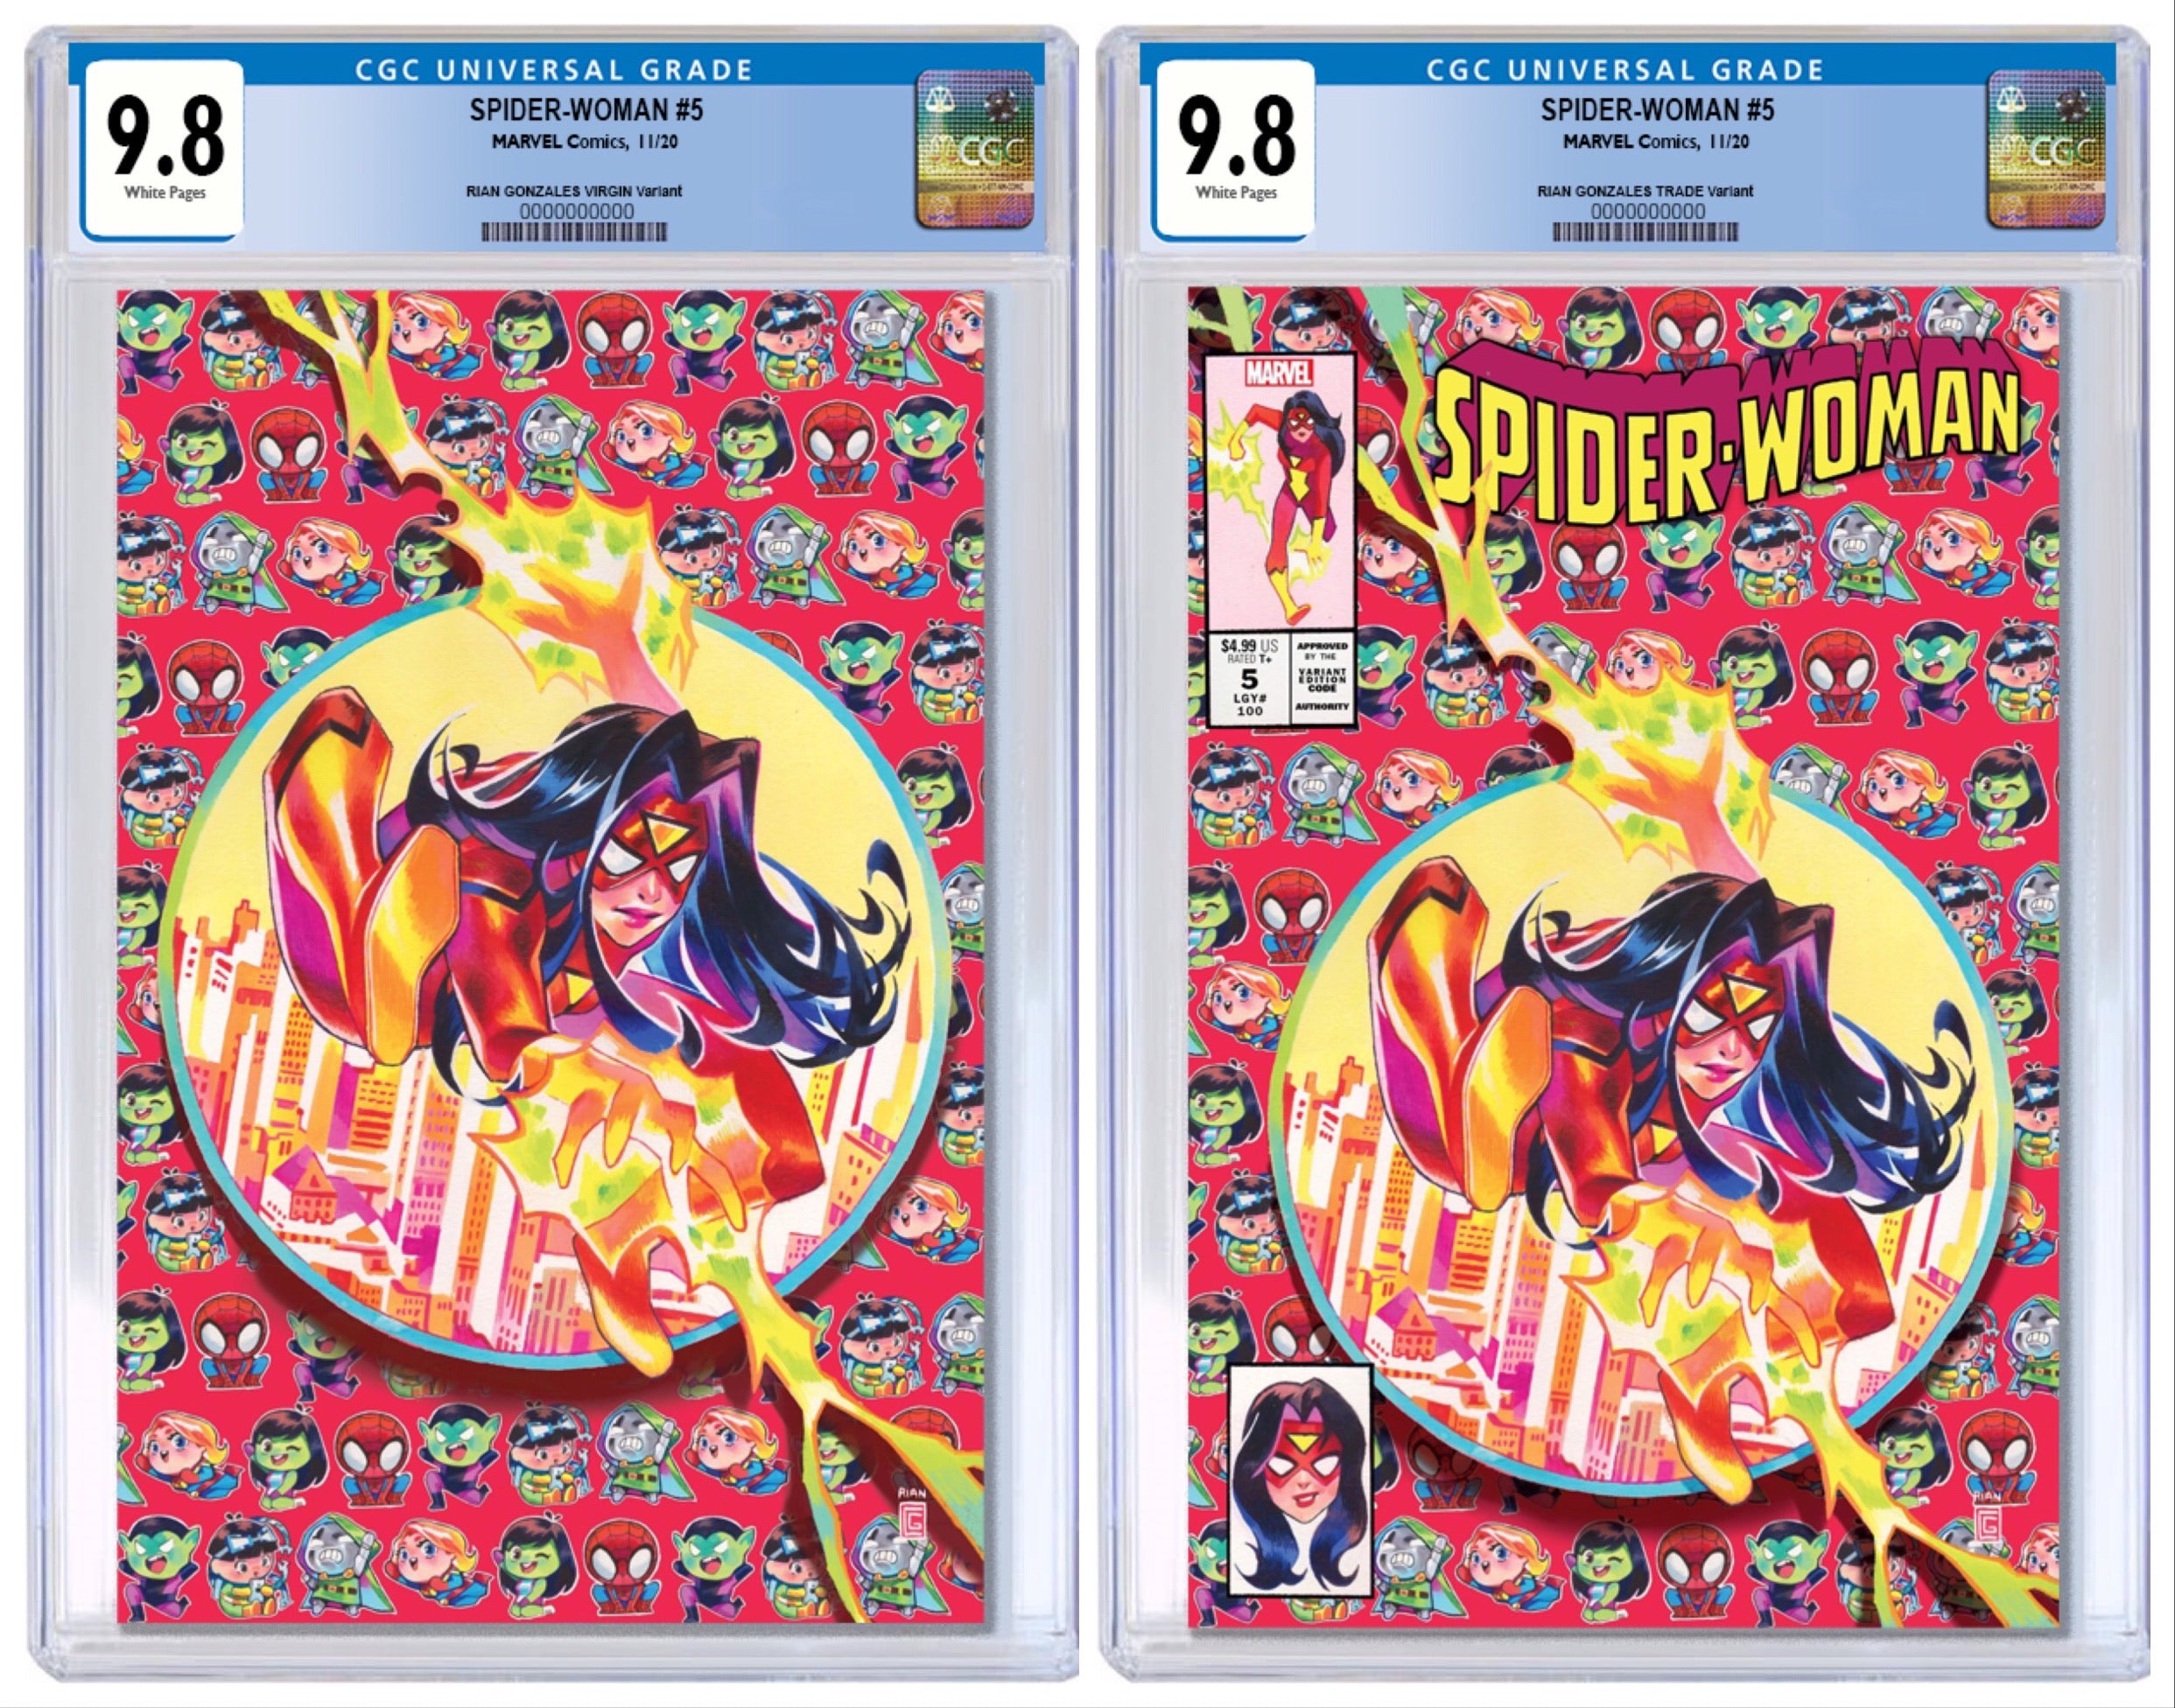 SPIDER-WOMAN #5 RIAN GONZALES EXCLUSIVE VARIANT CGC OPTIONS